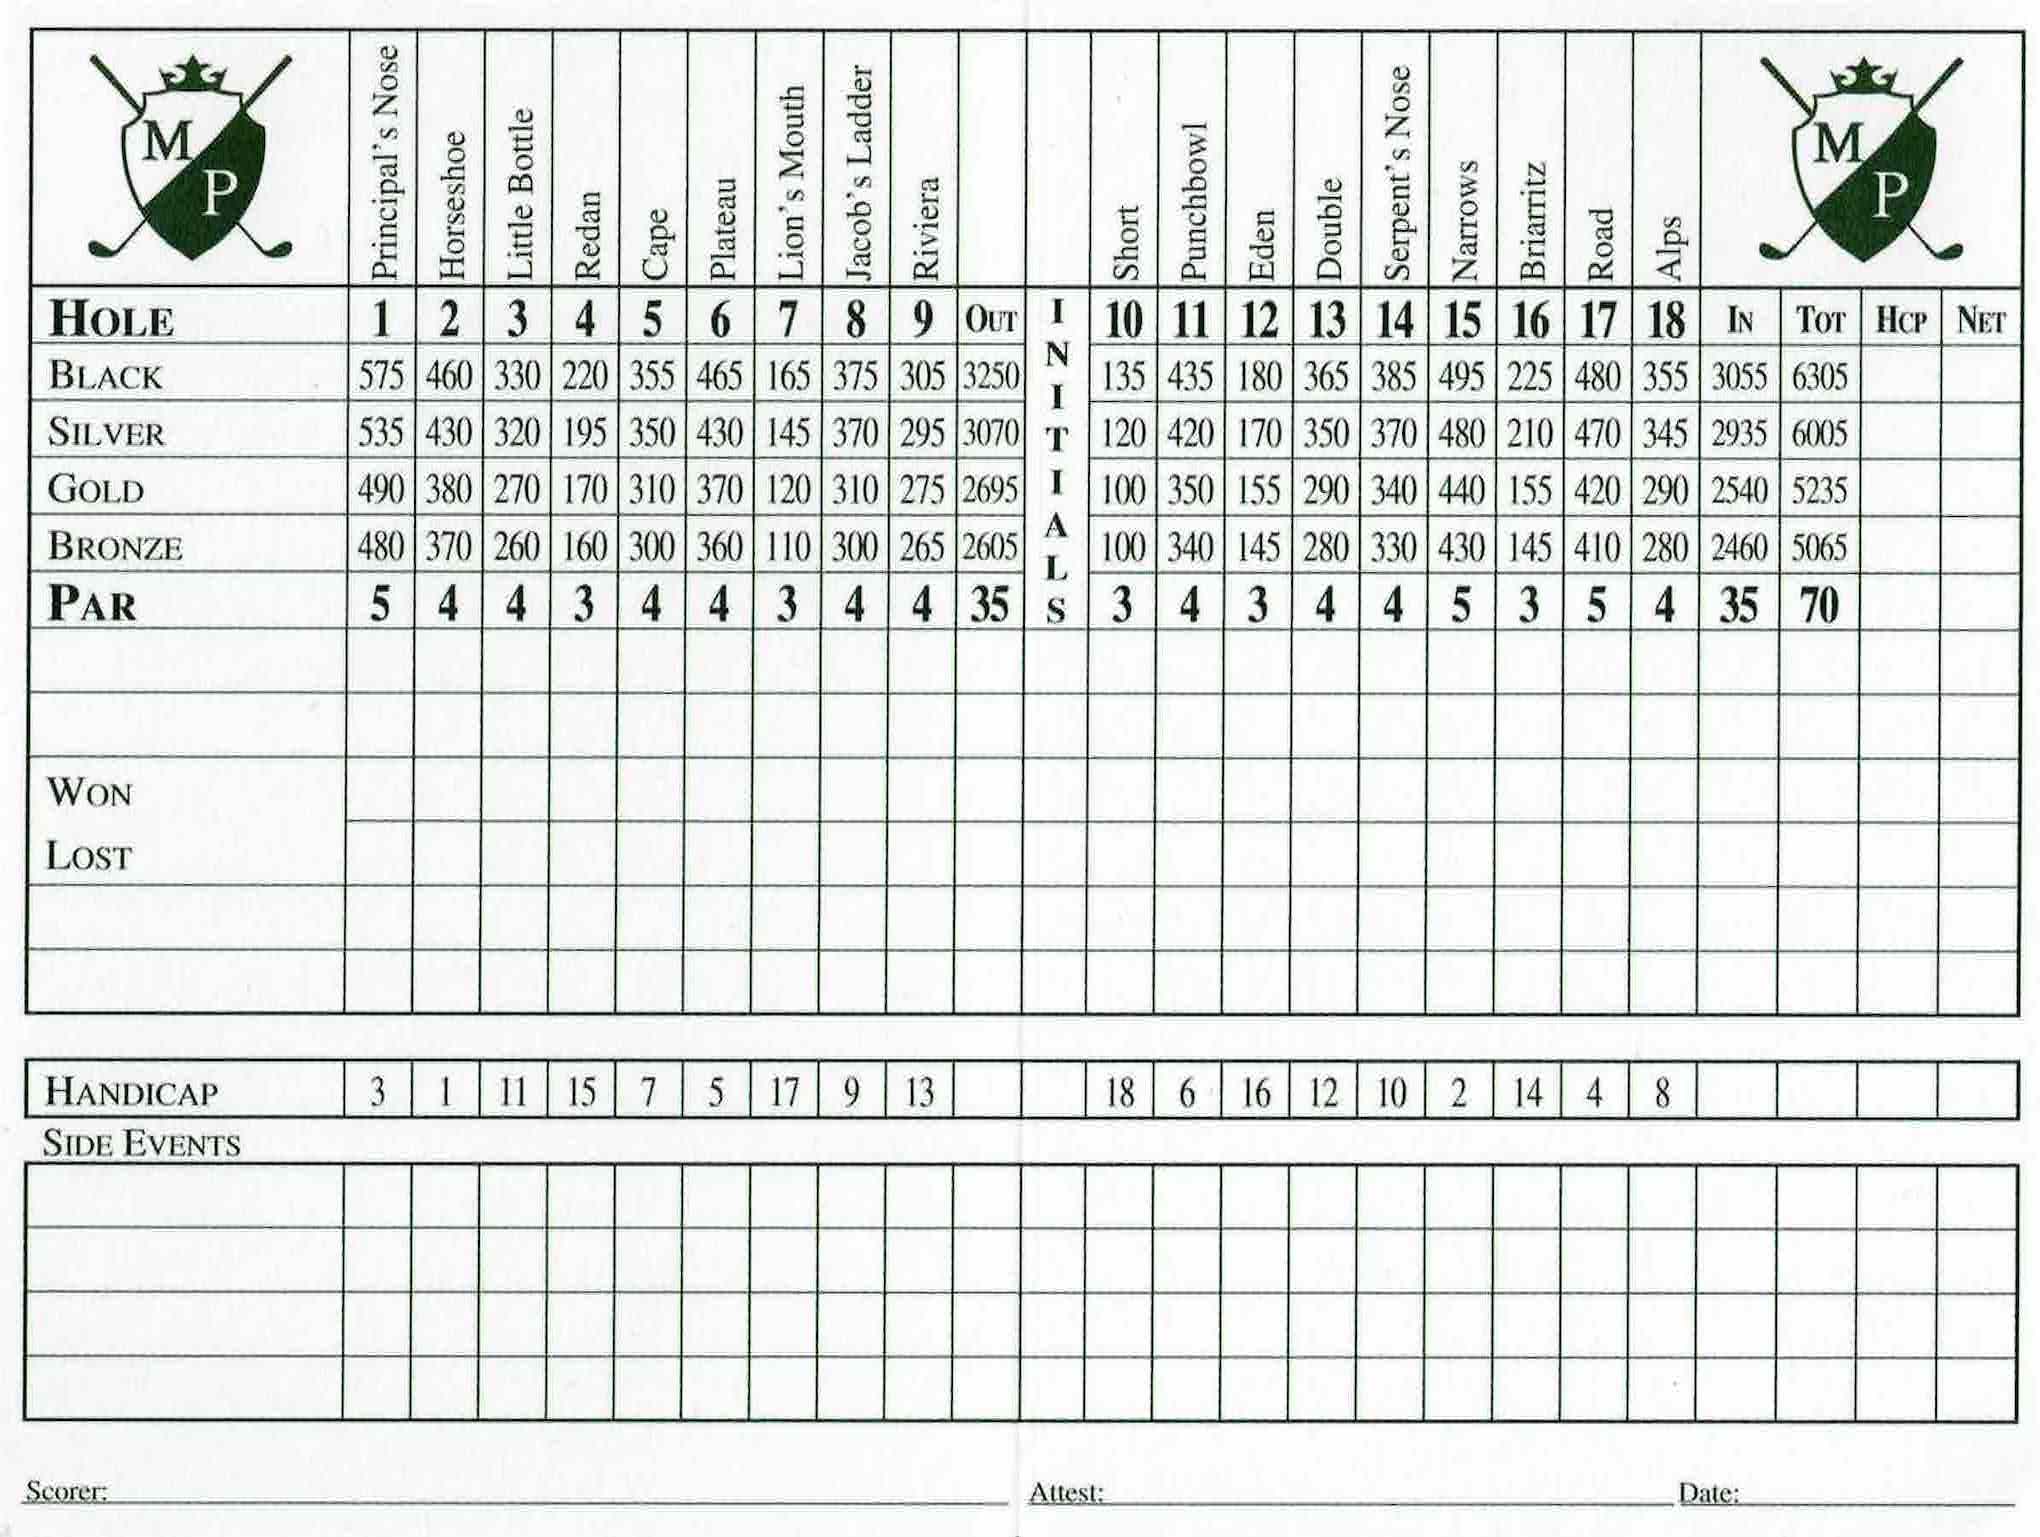 Scan of the scorecard from Mt. Prospect Golf Club in Mt. Prospect, Illinois. 